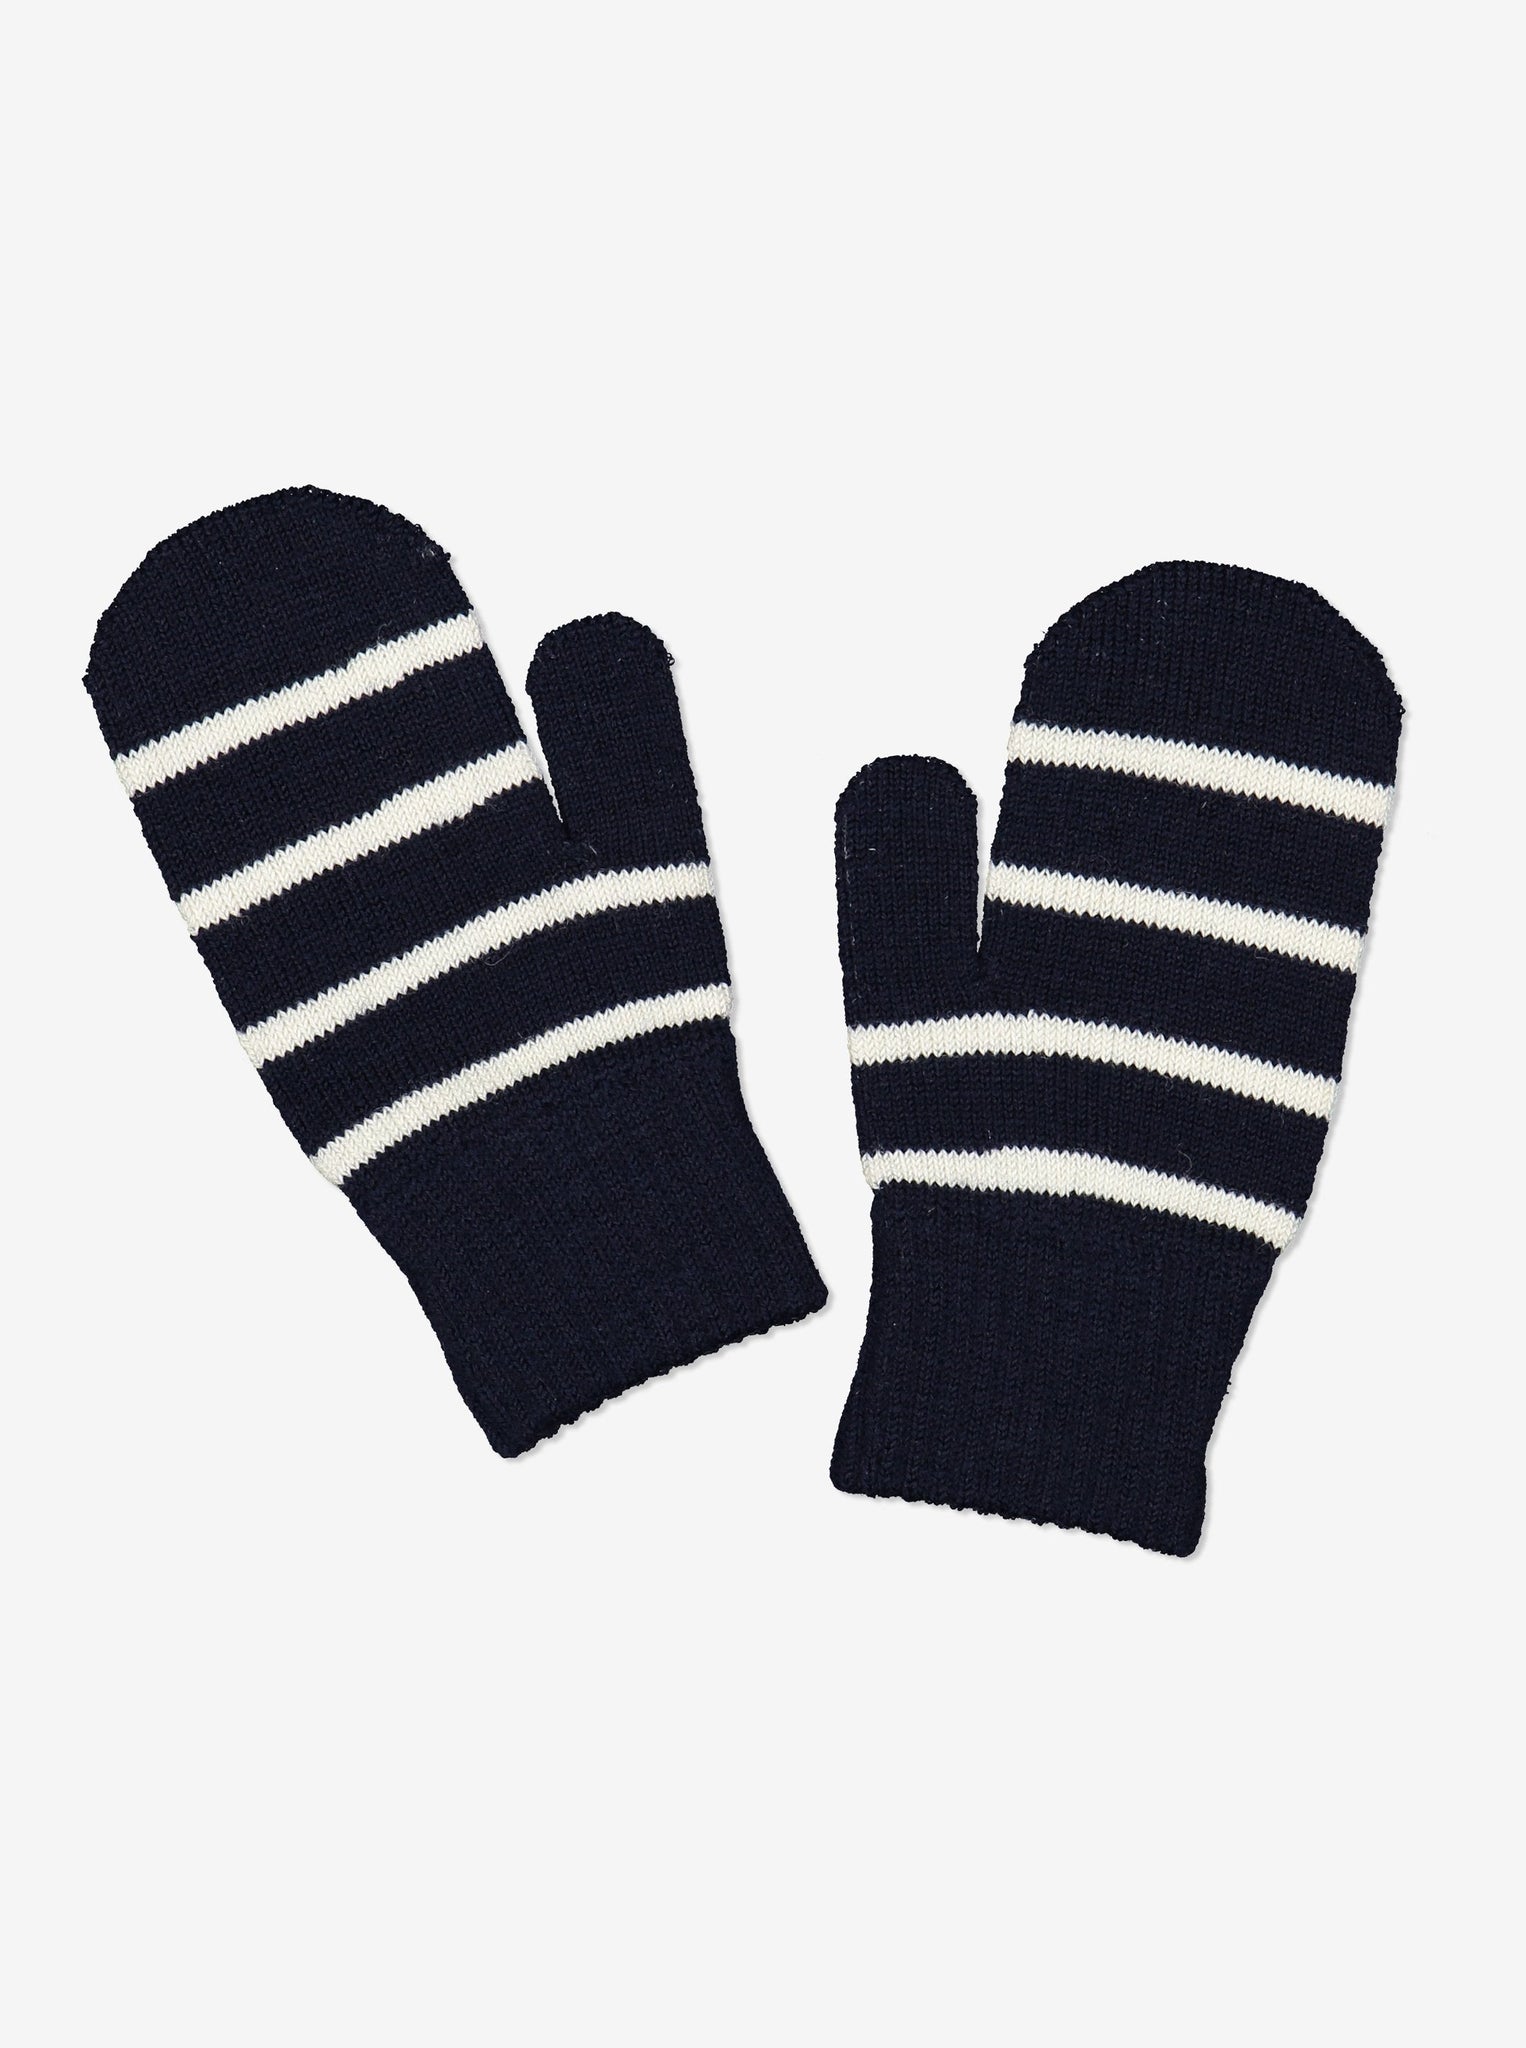 Navy Magic Kids Mittens from the Polarn O. Pyret kidswear collection. The best ethical kids outerwear.